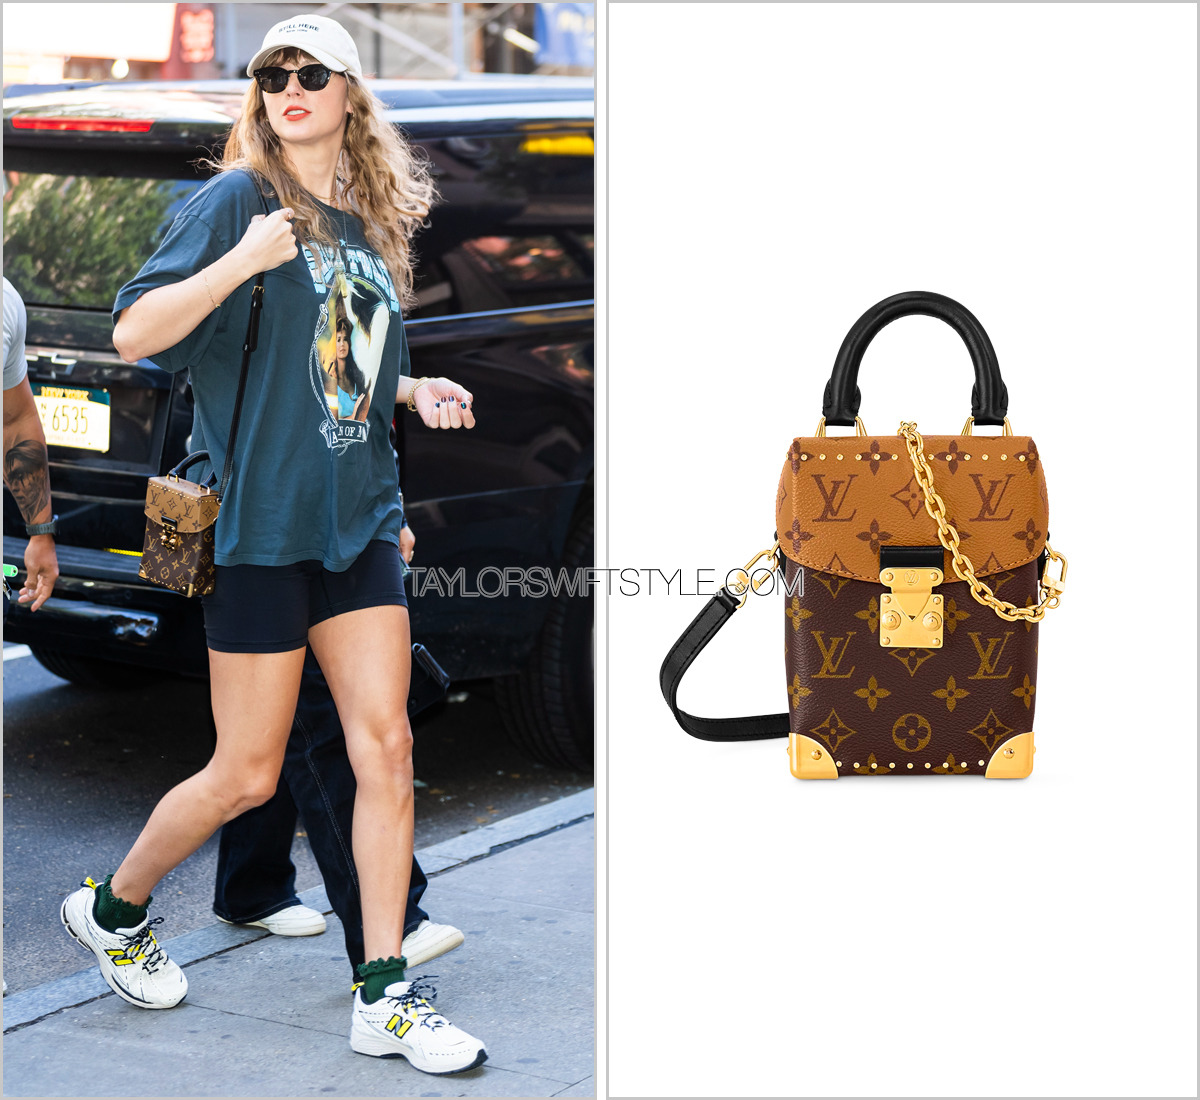 Louis Vuitton Camera Box Bag worn by Taylor Swift Out in New York City on  October 3, 2023